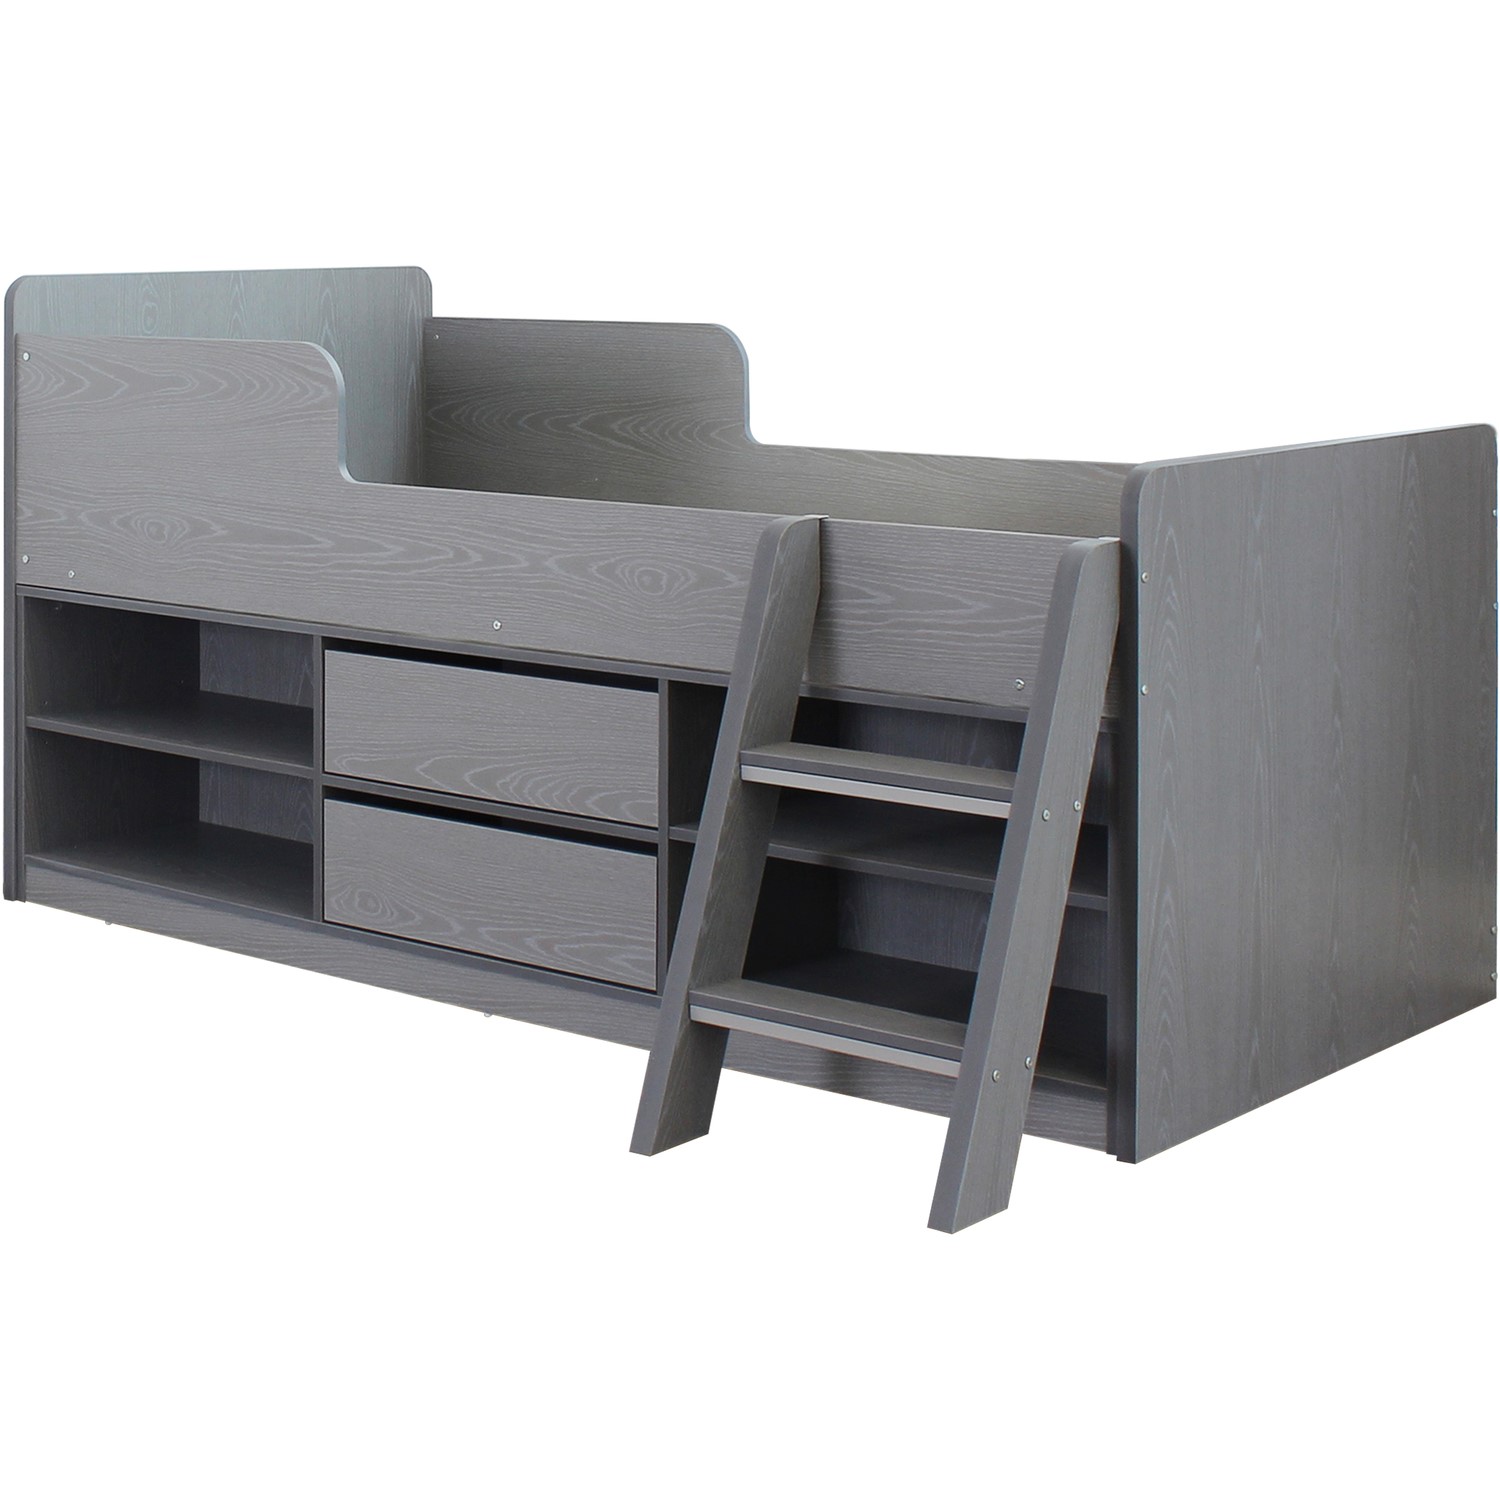 Photo of Grey low sleeper cabin bed with storage - felix - seconique